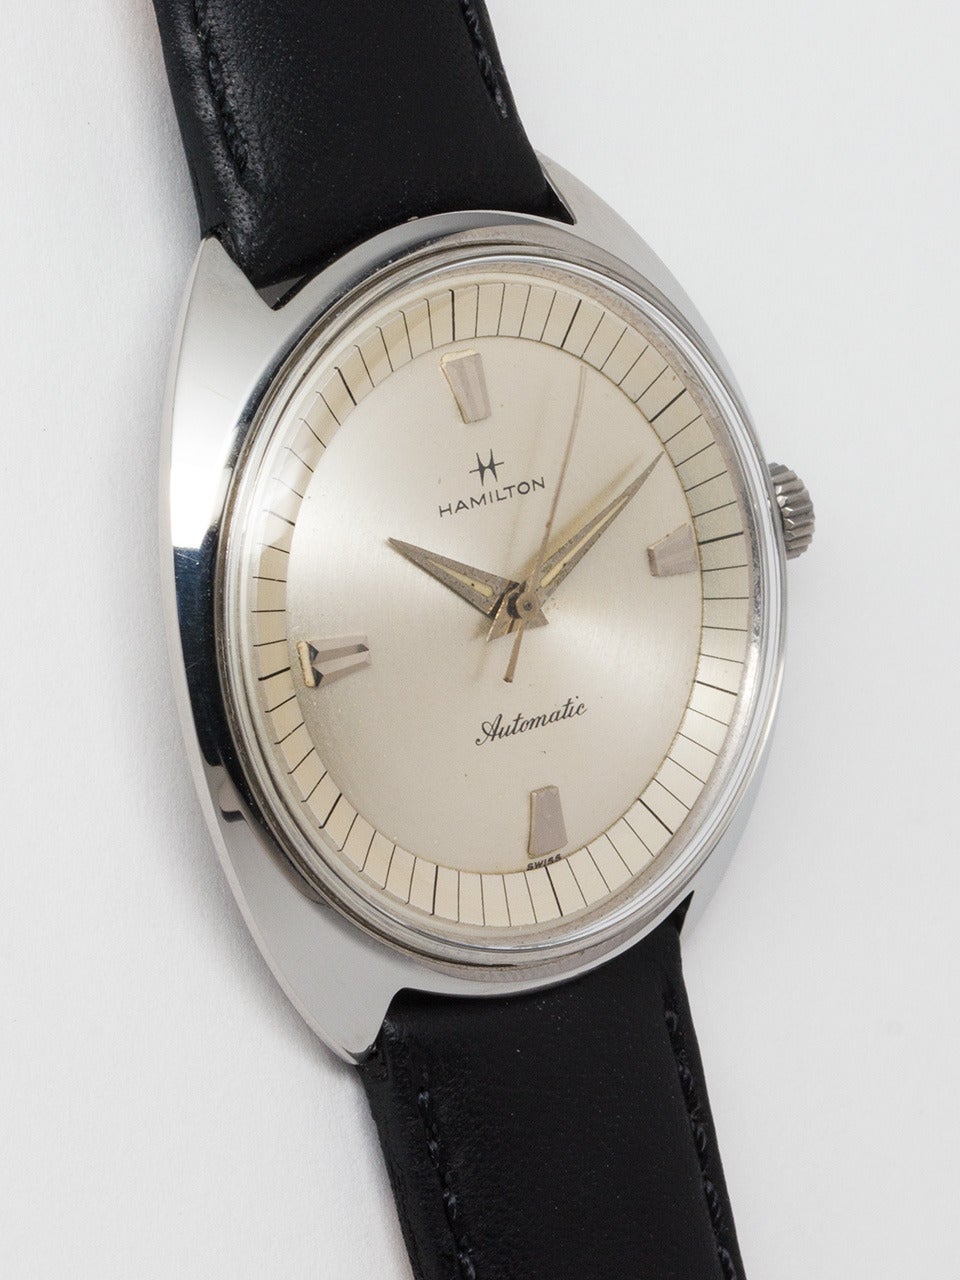 Hamilton Stainless Steel Automatic Wristwatch circa 1960's. Featuring 36 x 38mm case with silvered futuristic case and dial design, tapered dauphine hands. Swiss made automatic movement with sweep seconds. Very cool simplistic 60s design. Offered on